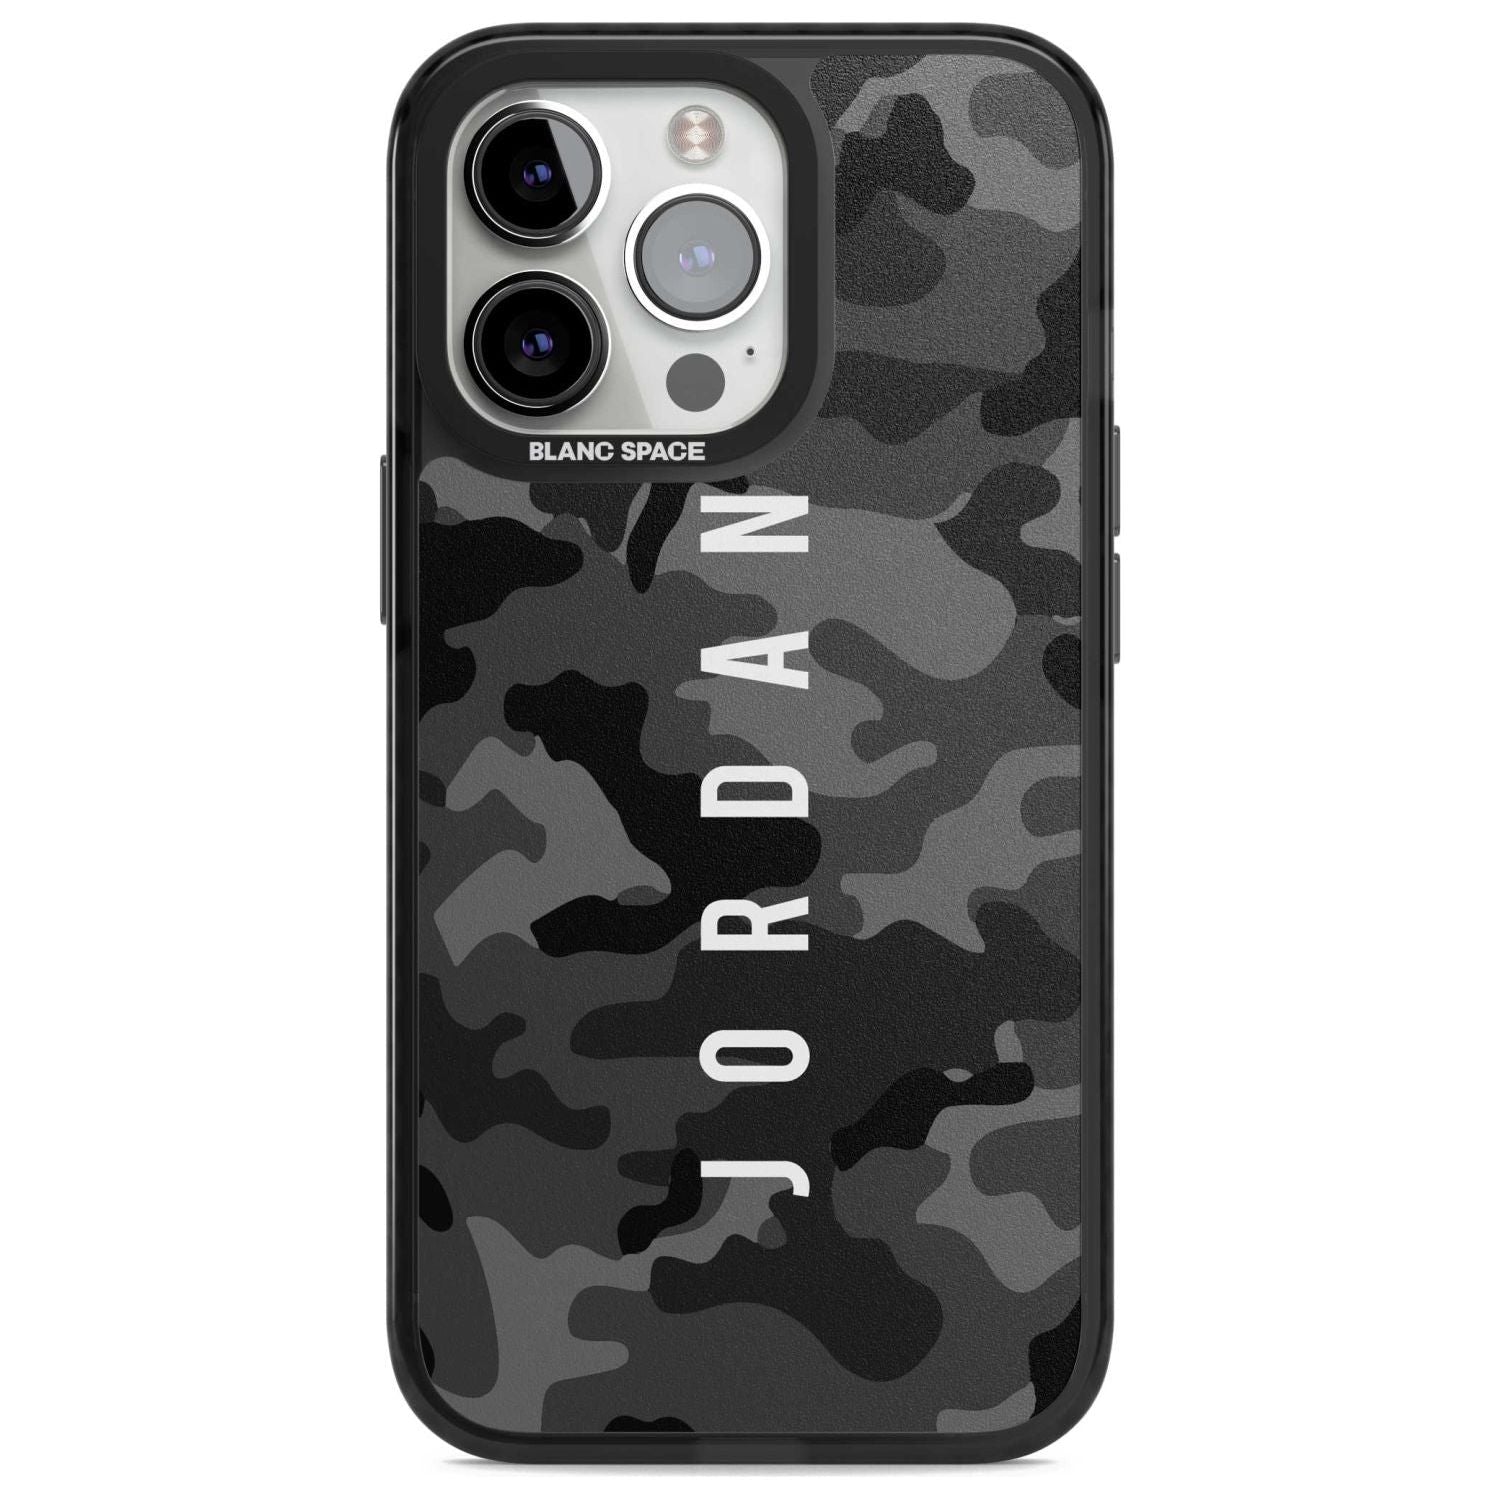 Personalised Small Vertical Name Black Camouflage Custom Phone Case iPhone 15 Pro Max / Magsafe Black Impact Case,iPhone 15 Pro / Magsafe Black Impact Case,iPhone 14 Pro Max / Magsafe Black Impact Case,iPhone 14 Pro / Magsafe Black Impact Case,iPhone 13 Pro / Magsafe Black Impact Case Blanc Space